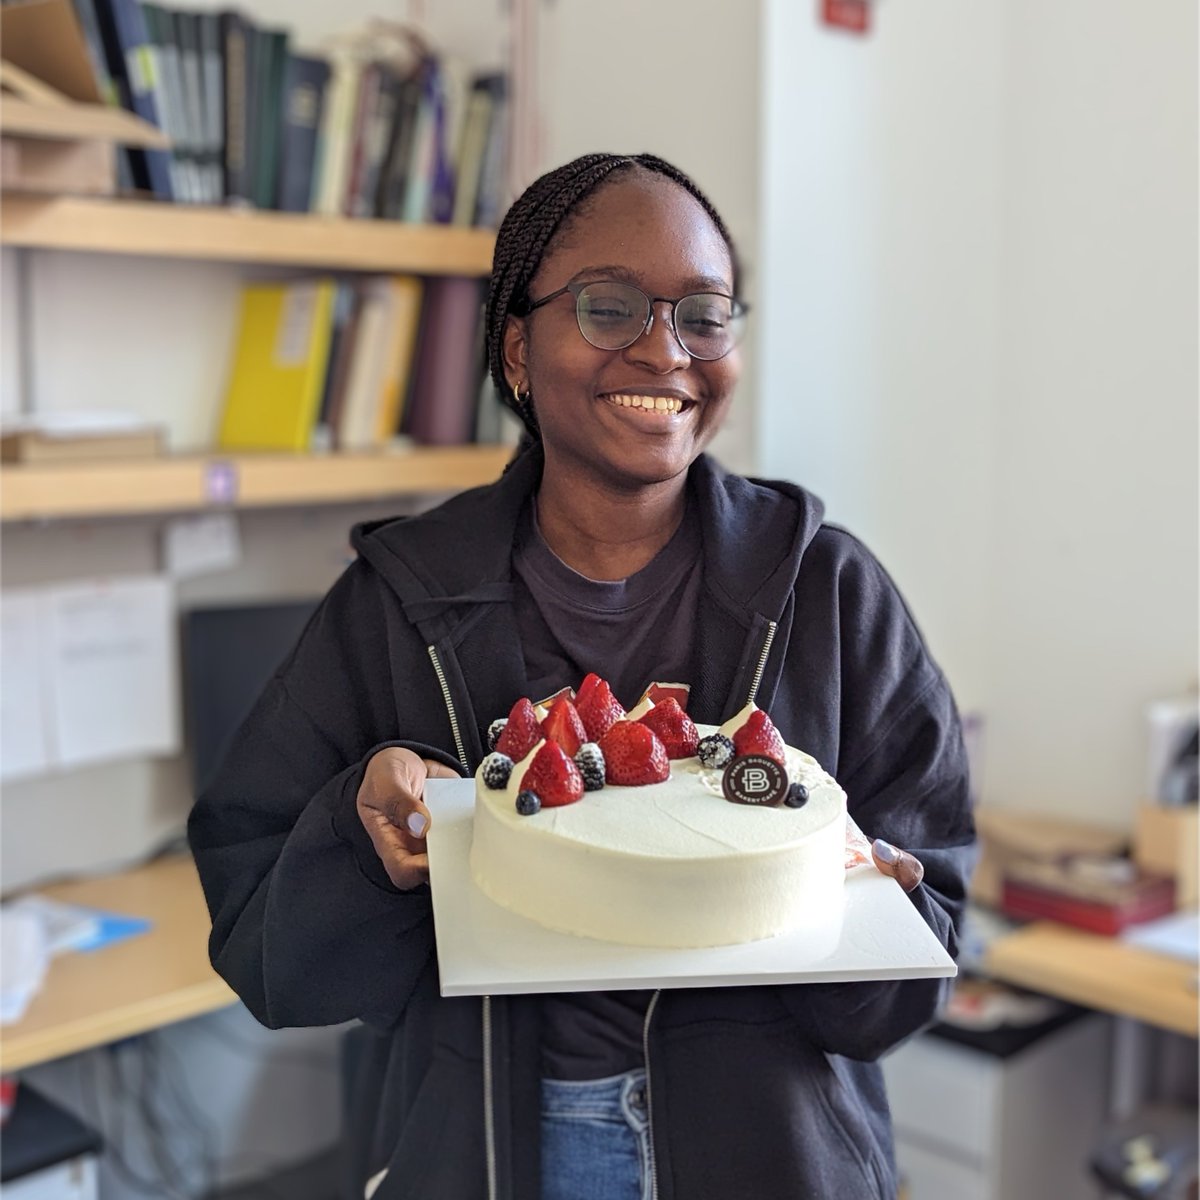 We are thrilled to announce Temi Majekodumi has passed her #qualifying exam @nyutandon making her the newest @MontclareLabs #PhD candidate! Join us in congratulating her on this #milestone ‼️🎉

#NYUTandonMade #SciEngage #phdlife #labtradition #AcademicChatter #WomenInSTEM #cake